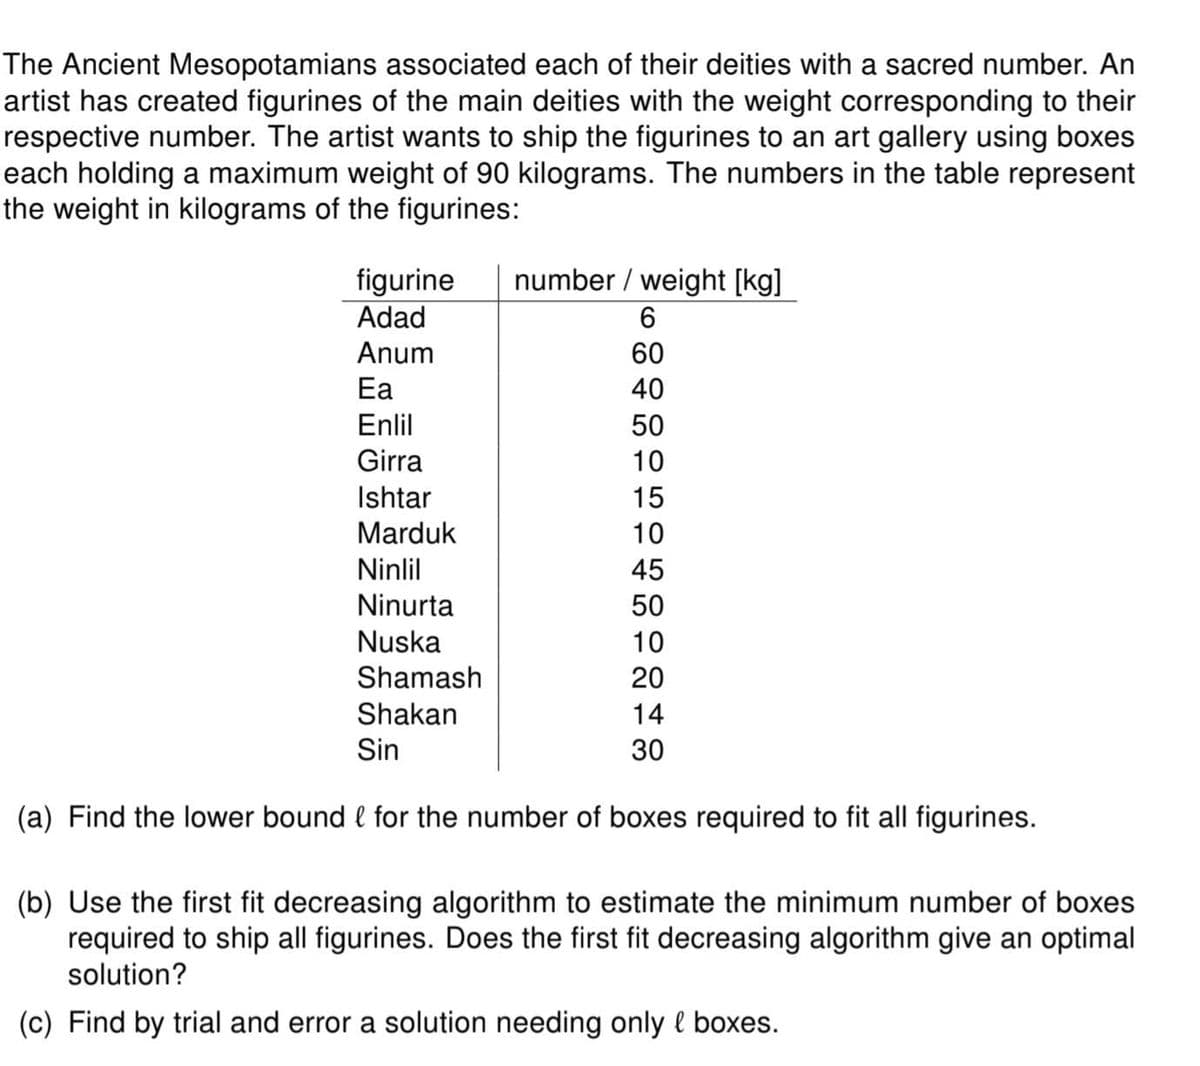 The Ancient Mesopotamians associated each of their deities with a sacred number. An
artist has created figurines of the main deities with the weight corresponding to their
respective number. The artist wants to ship the figurines to an art gallery using boxes
each holding a maximum weight of 90 kilograms. The numbers in the table represent
the weight in kilograms of the figurines:
figurine
Adad
Anum
Ea
Enlil
Girra
Ishtar
Marduk
Ninlil
Ninurta
Nuska
number / weight [kg]
6
60
40
50
10
15
10
45
50
10
Shamash
20
14
Shakan
Sin
30
(a) Find the lower bound & for the number of boxes required to fit all figurines.
(b) Use the first fit decreasing algorithm to estimate the minimum number of boxes
required to ship all figurines. Does the first fit decreasing algorithm give an optimal
solution?
(c) Find by trial and error a solution needing only l boxes.